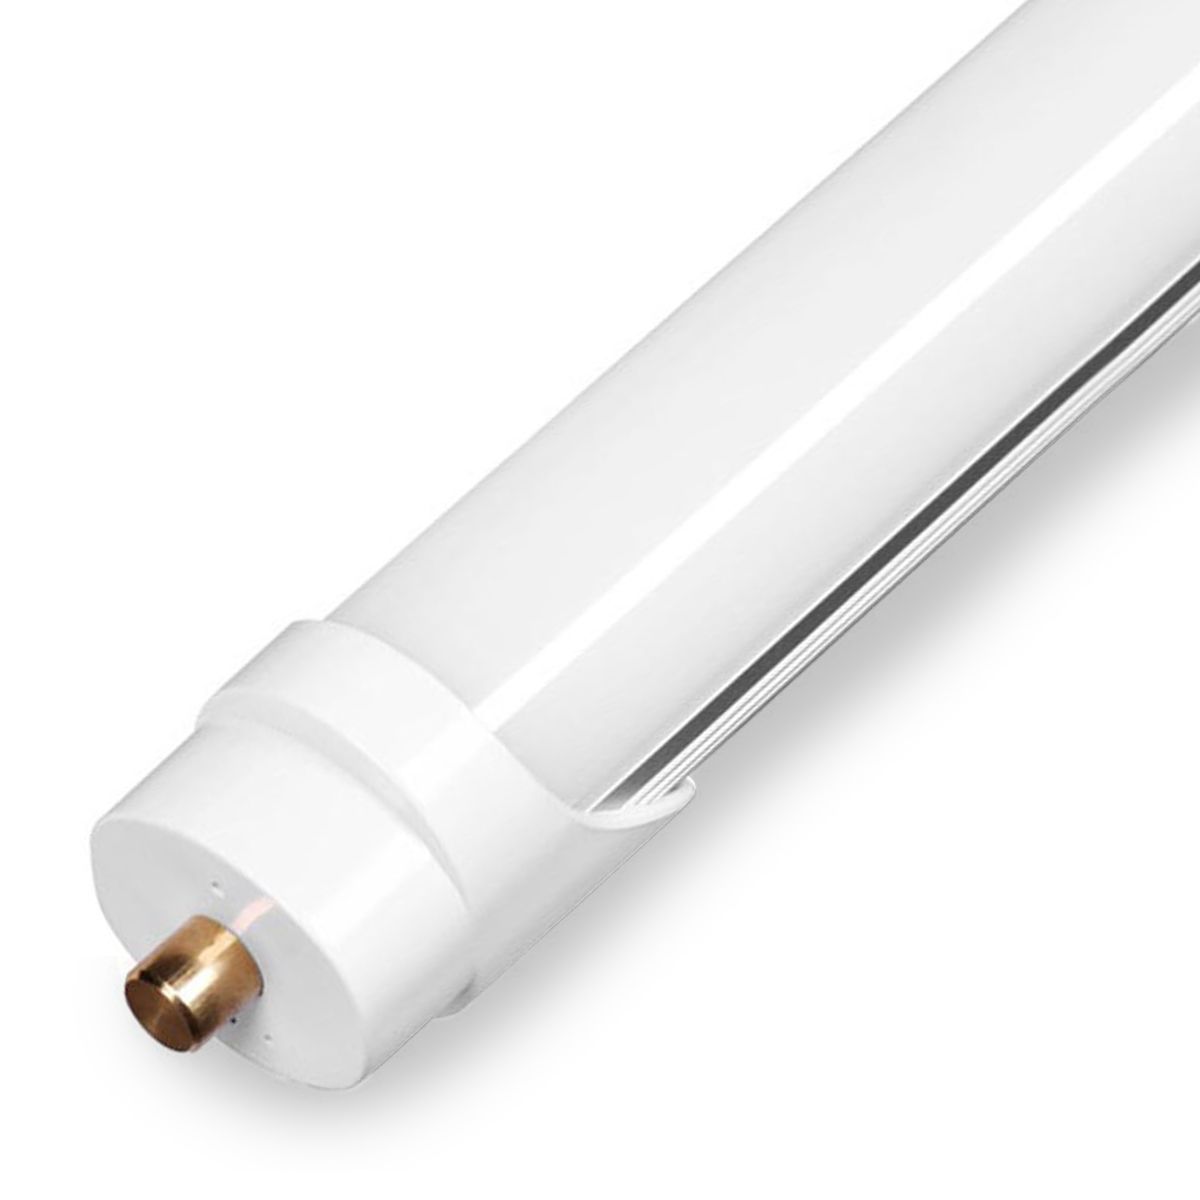 8ft LED Tube - 40W / 6,000 lm - FA8 - Ballast Bypass - 15 Pack